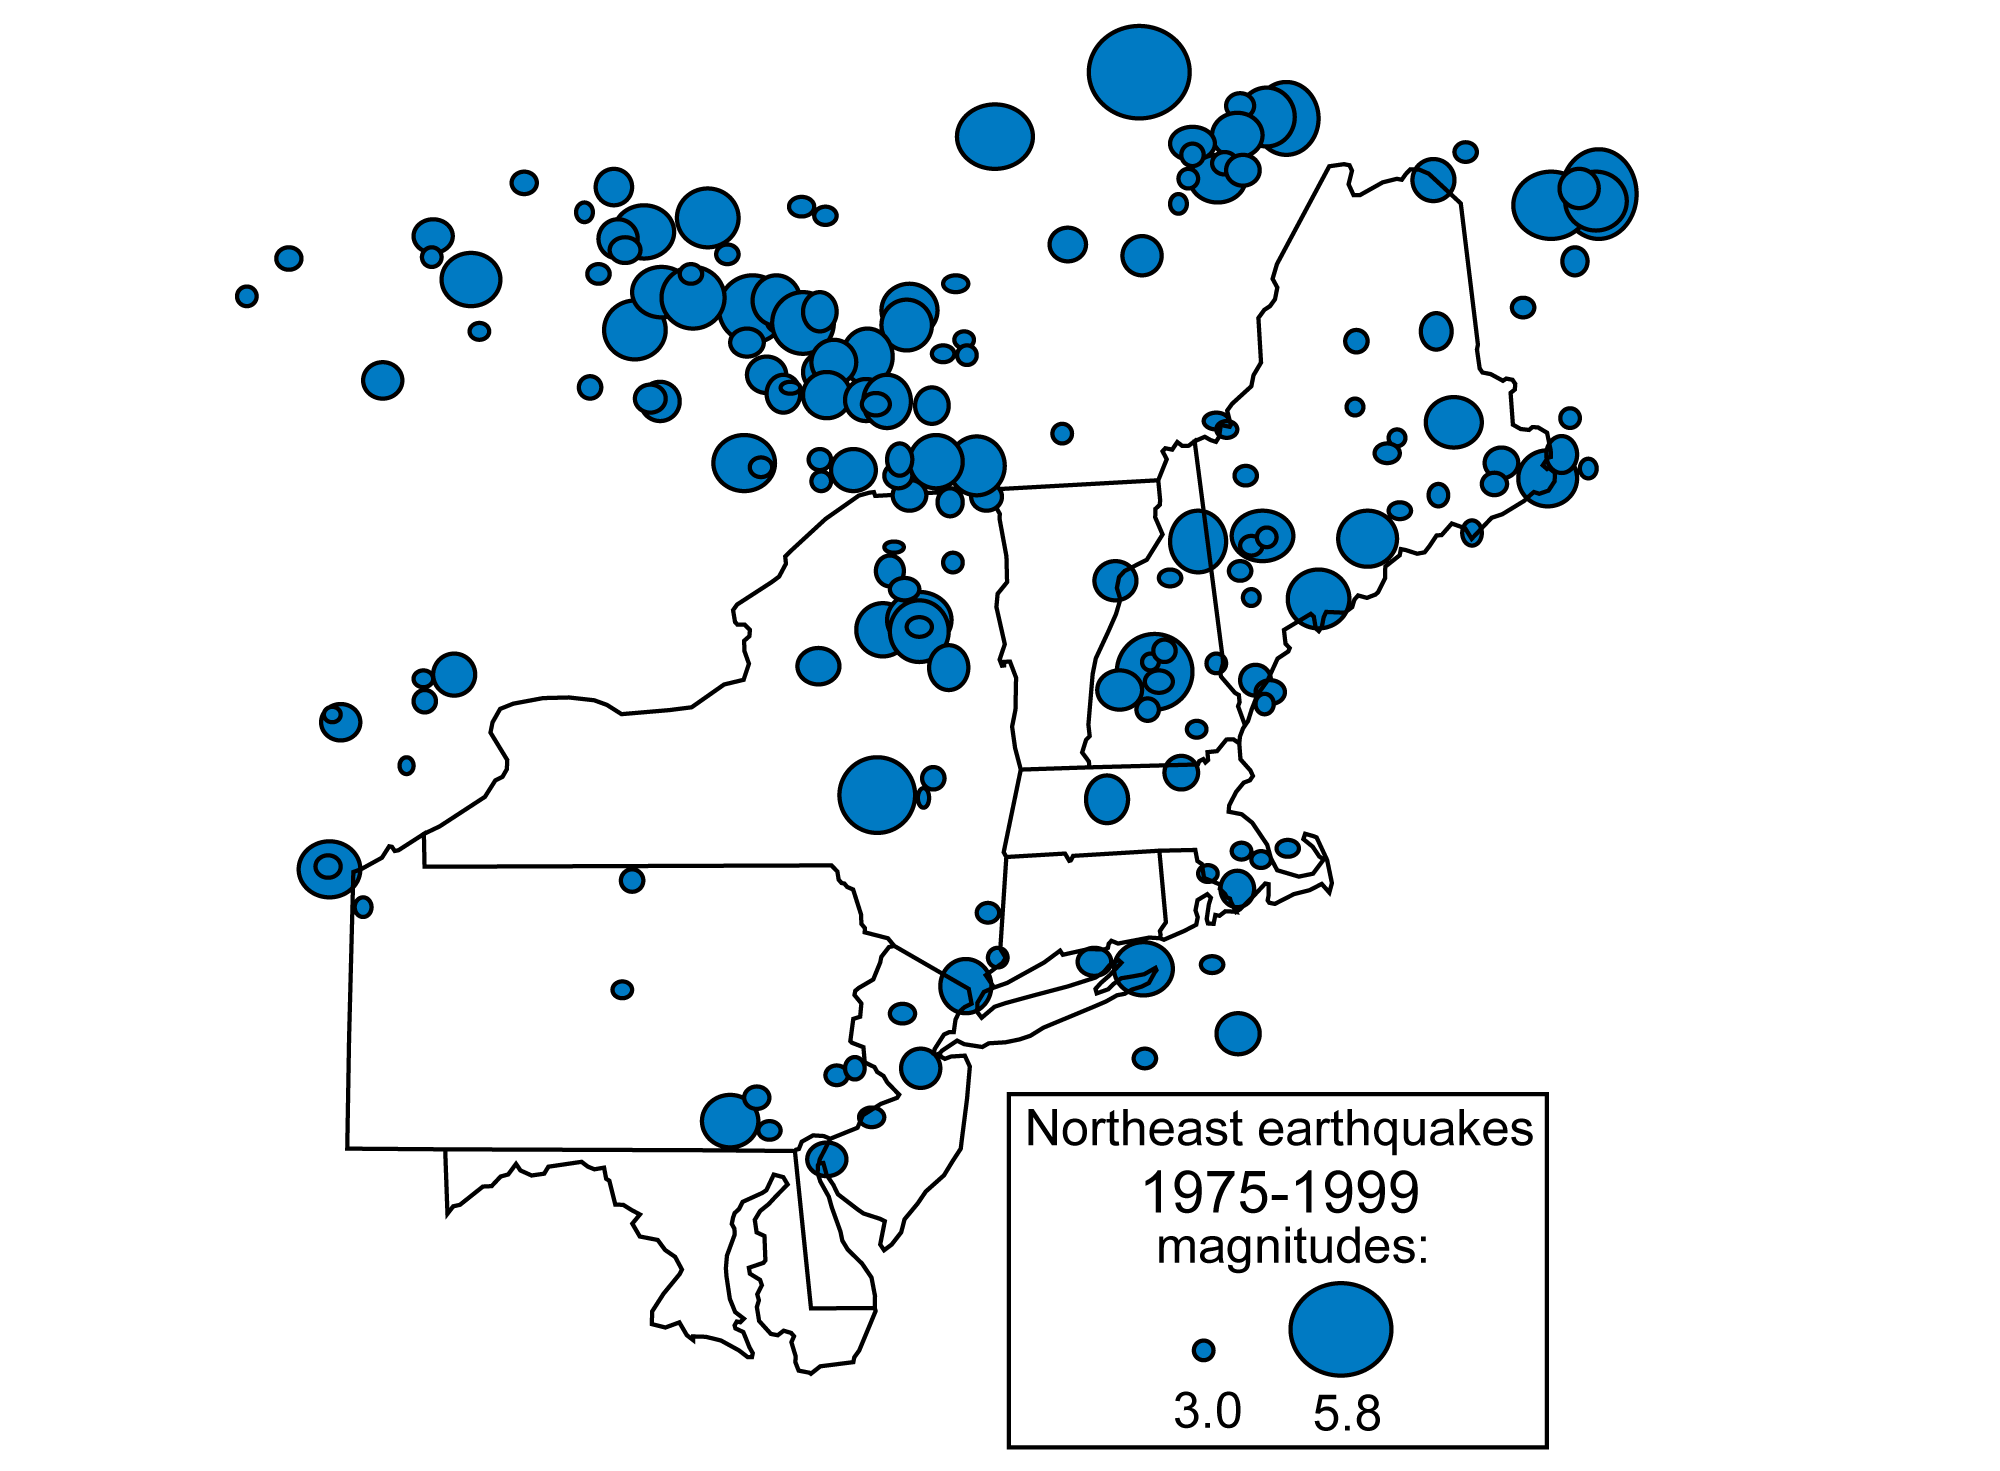 Map of the northeastern United States showing the locations and magnitudes of earthquakes of at least 3.0 on the Richter Scale from 1975 to 1999. The most powerful earthquake measured 5.8 on the Richter scale and occurred in Canada.